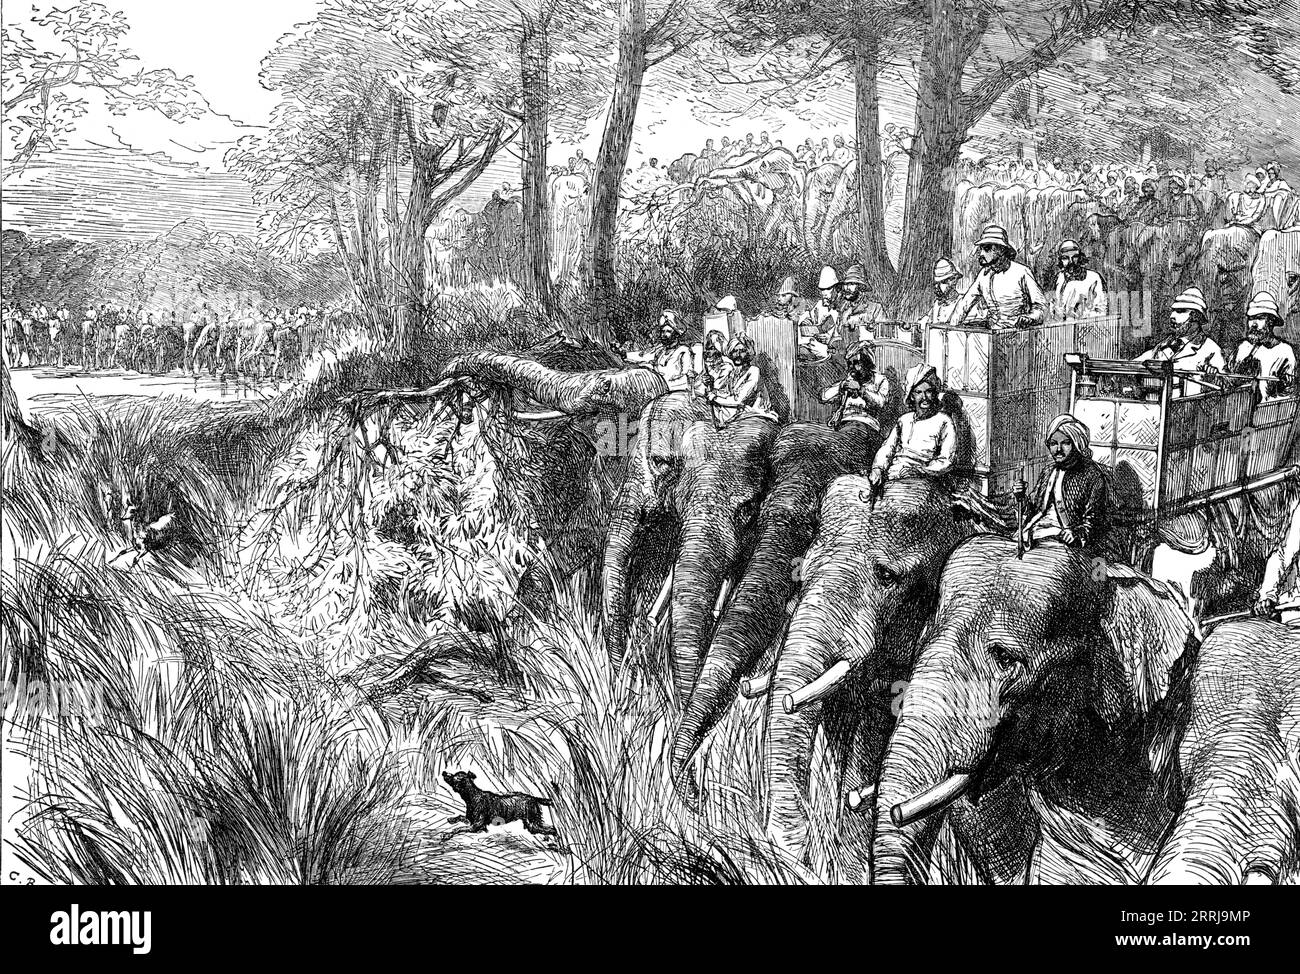 Crossing a River in the Terai, 1876. The future King Edward VII hunting tigers in India. '...the elephant is very careful, feeling the ground with his trunk for the edge of the nullah, as in most cases it cannot be seen from the long grass. When the margin is reached he places both feet together, and they partly go down through the earth, which lets them down easily. The hind legs are bent to the ground in the attitude of a man on his knees. The trunk is then used to feel the bottom of the nullah to know if it is firm enough...the animal then steps cautiously across and begins the ascent on th Stock Photo